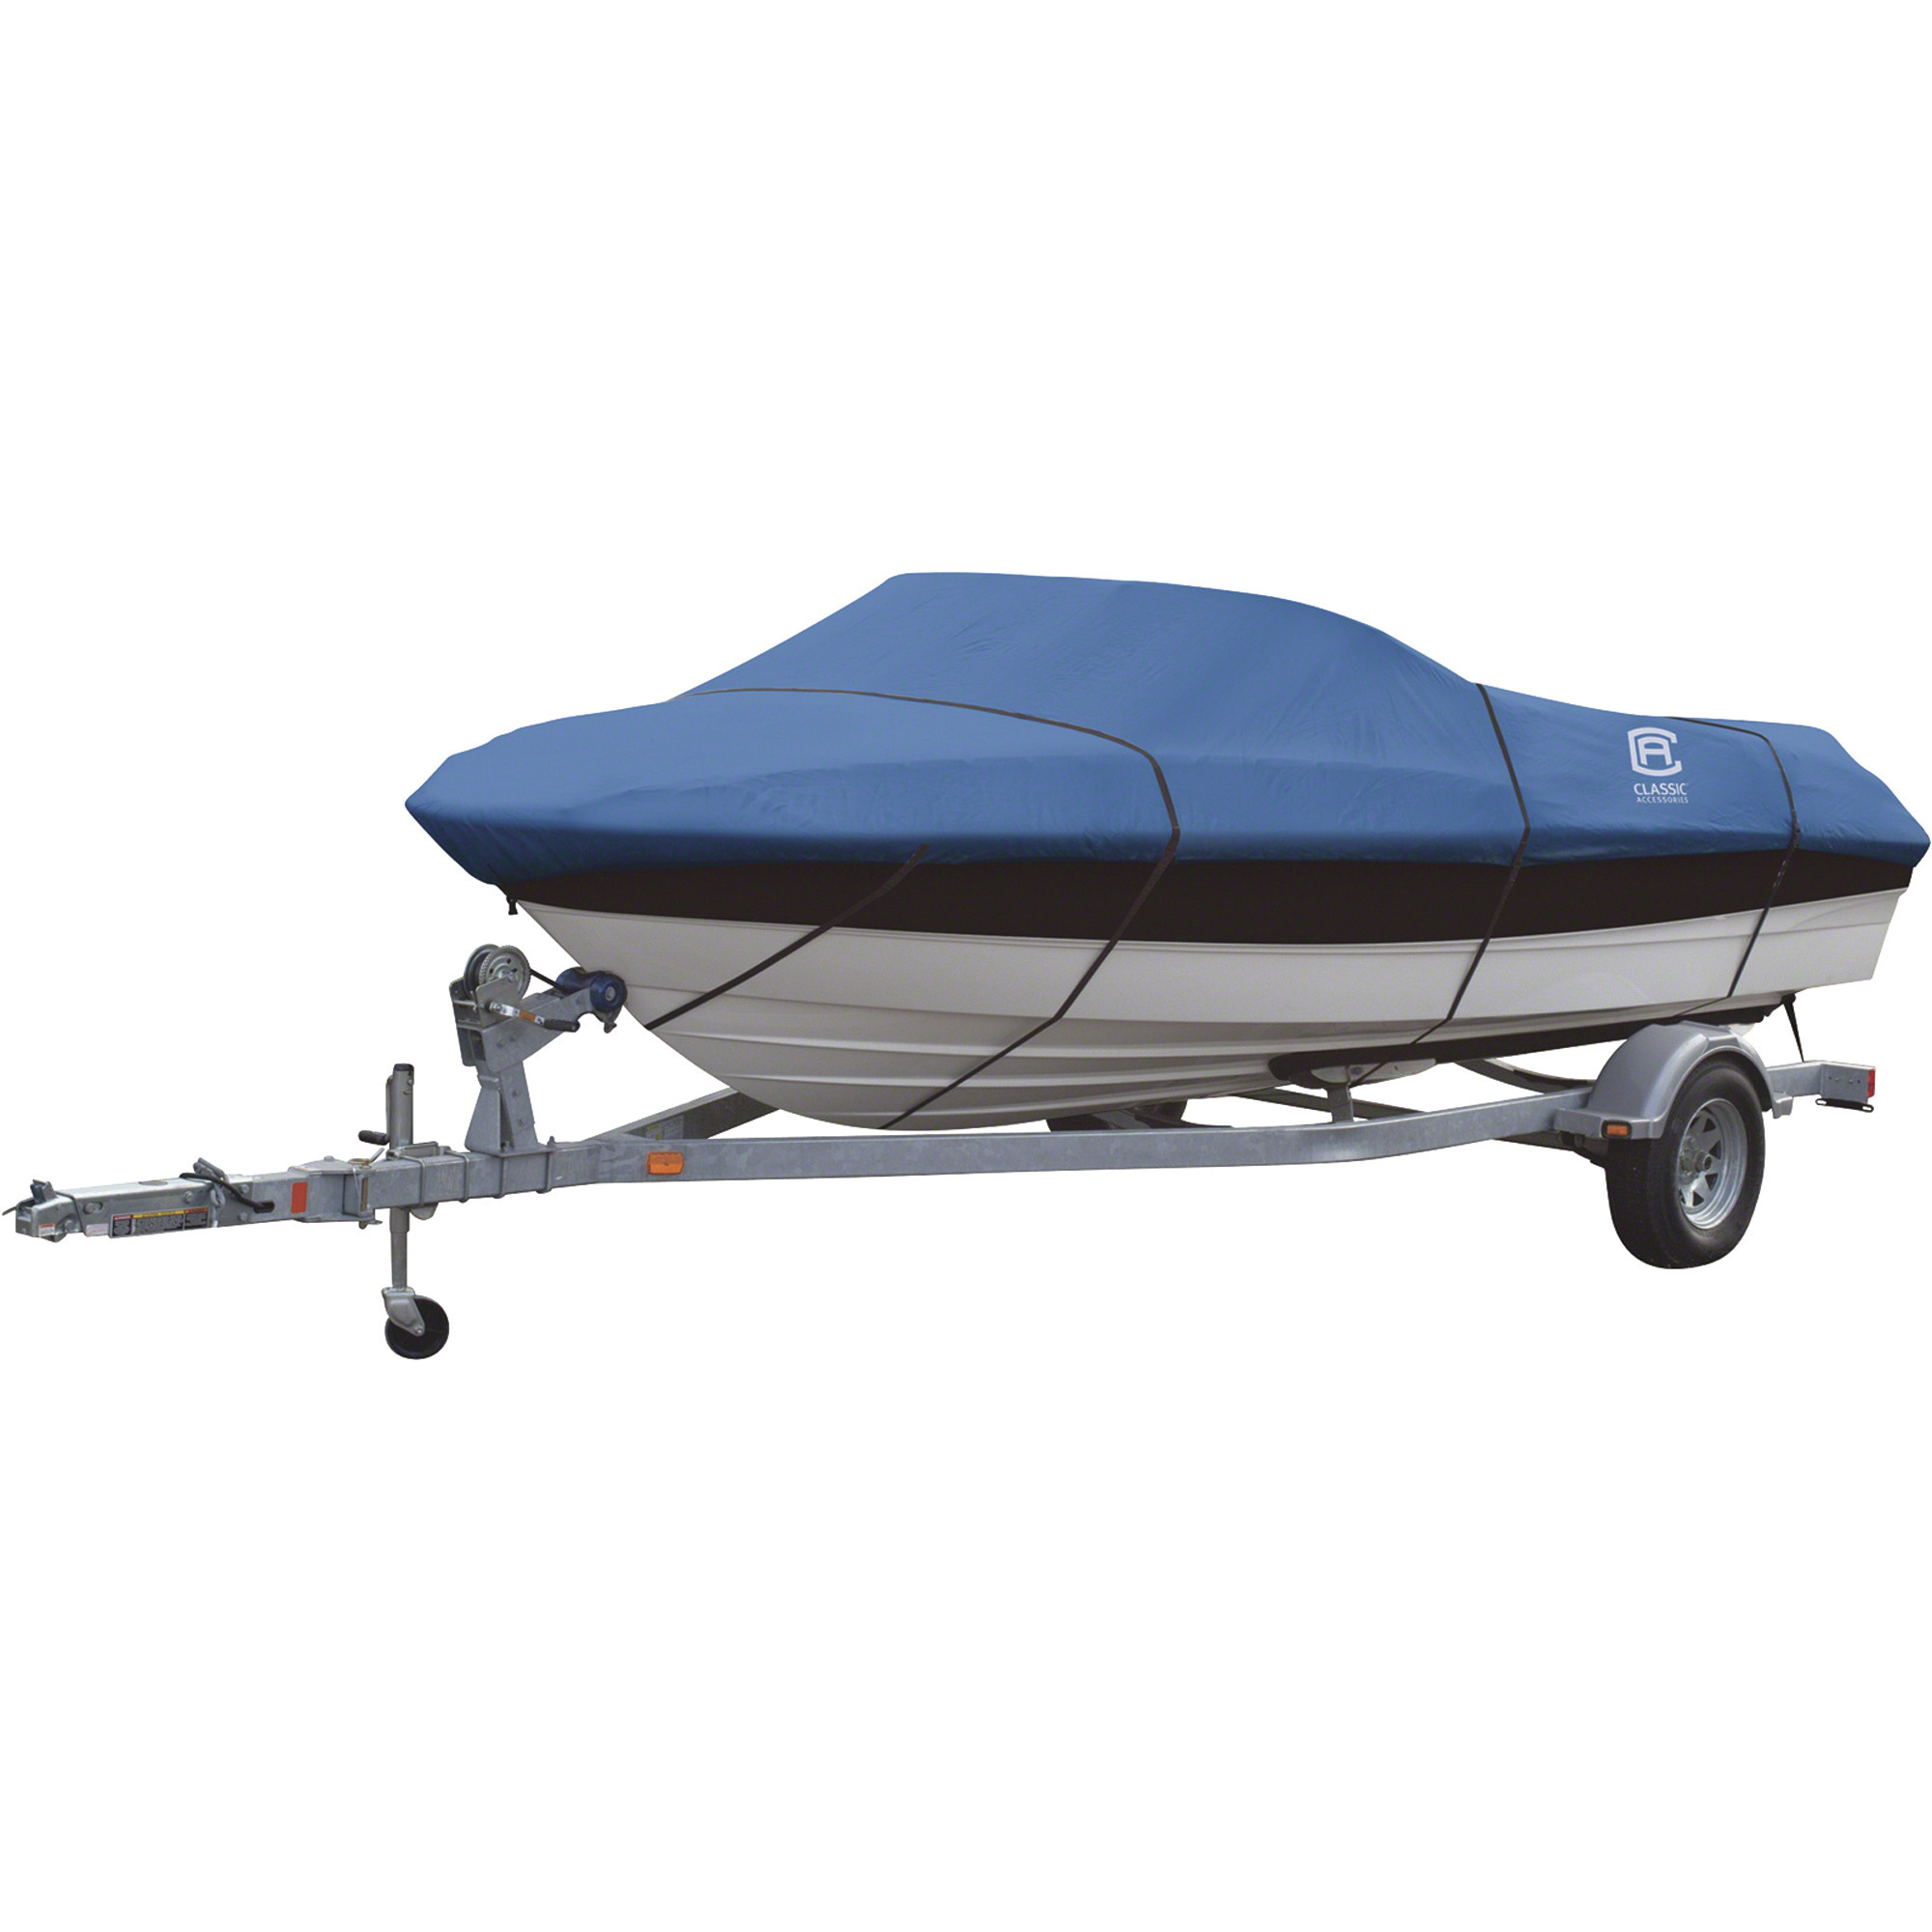 Classic Accessories Stellex All Seasons Boat Cover, Blue, Fits 14ft.-16ft. x 90Inch W Boats, Model 20-145-090501-00